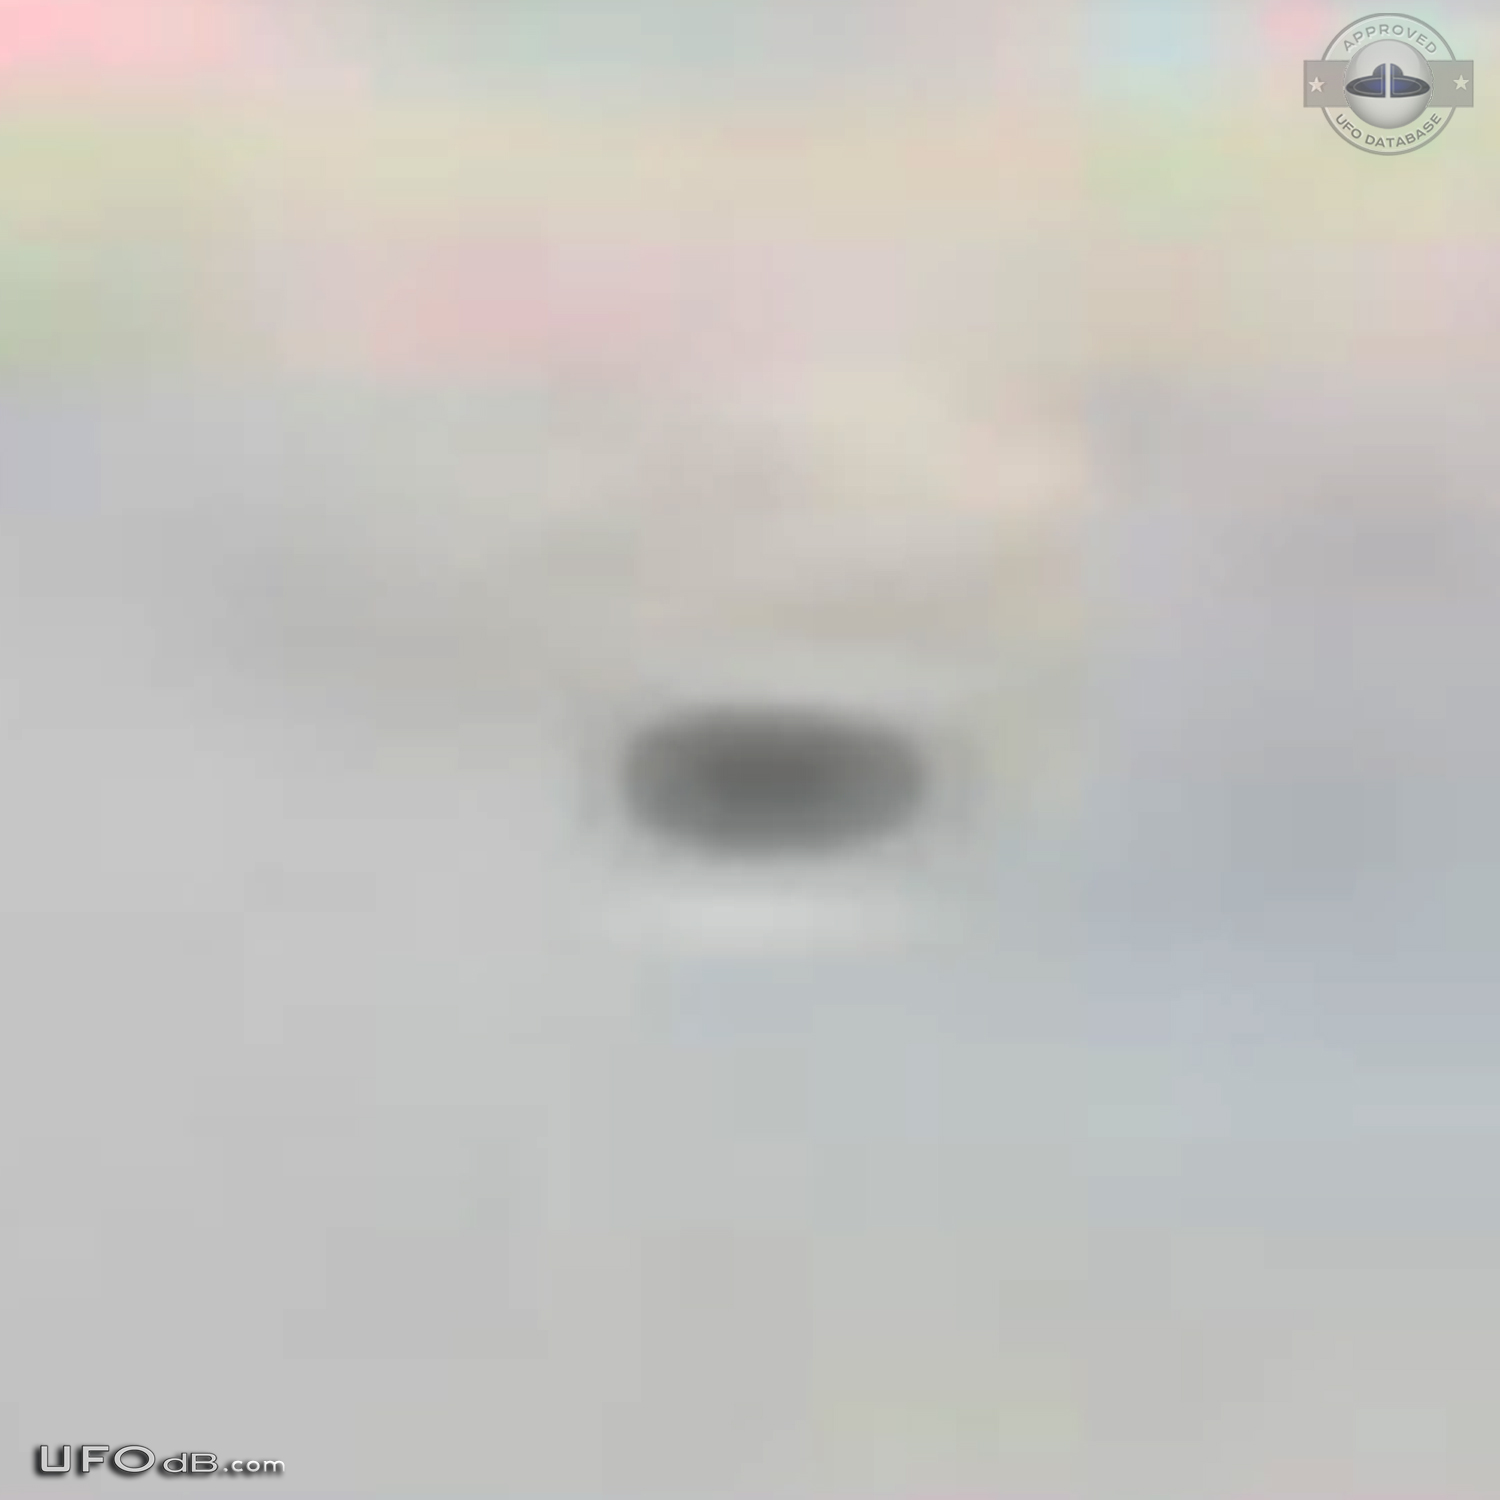 UFO in the city of Rize Turkey near the Black Sea caught on picture UFO Picture #461-4